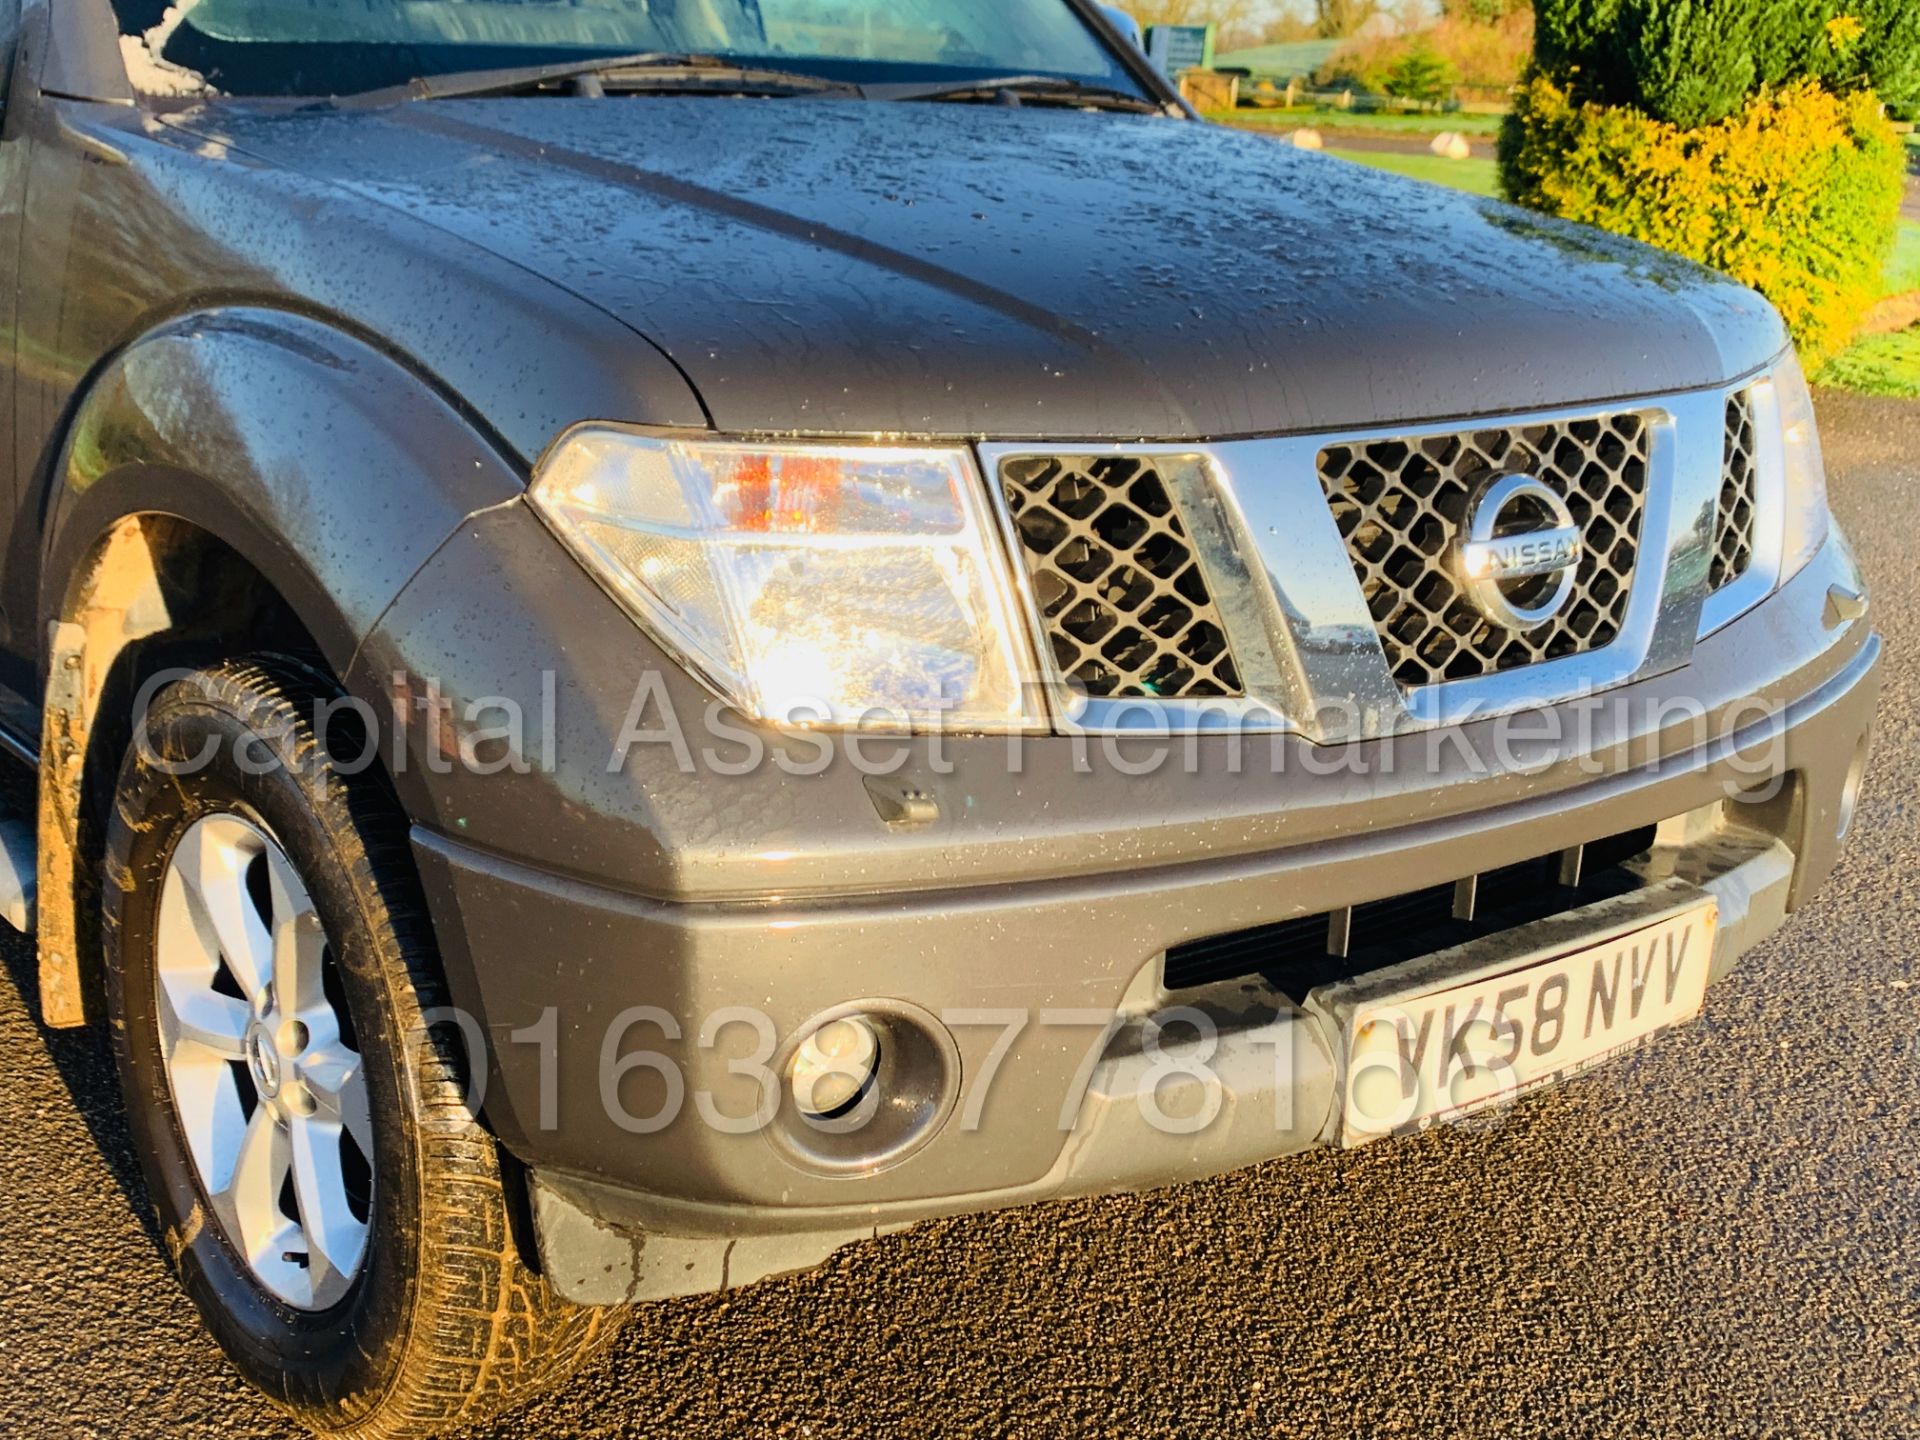 ON SALE NISSAN NAVARA *OUTLAW* DOUBLE CAB PICK-UP *4X4* (2009) '2.5 DCI-171 BHP-*AIR CON* (NO VAT) - Image 12 of 42